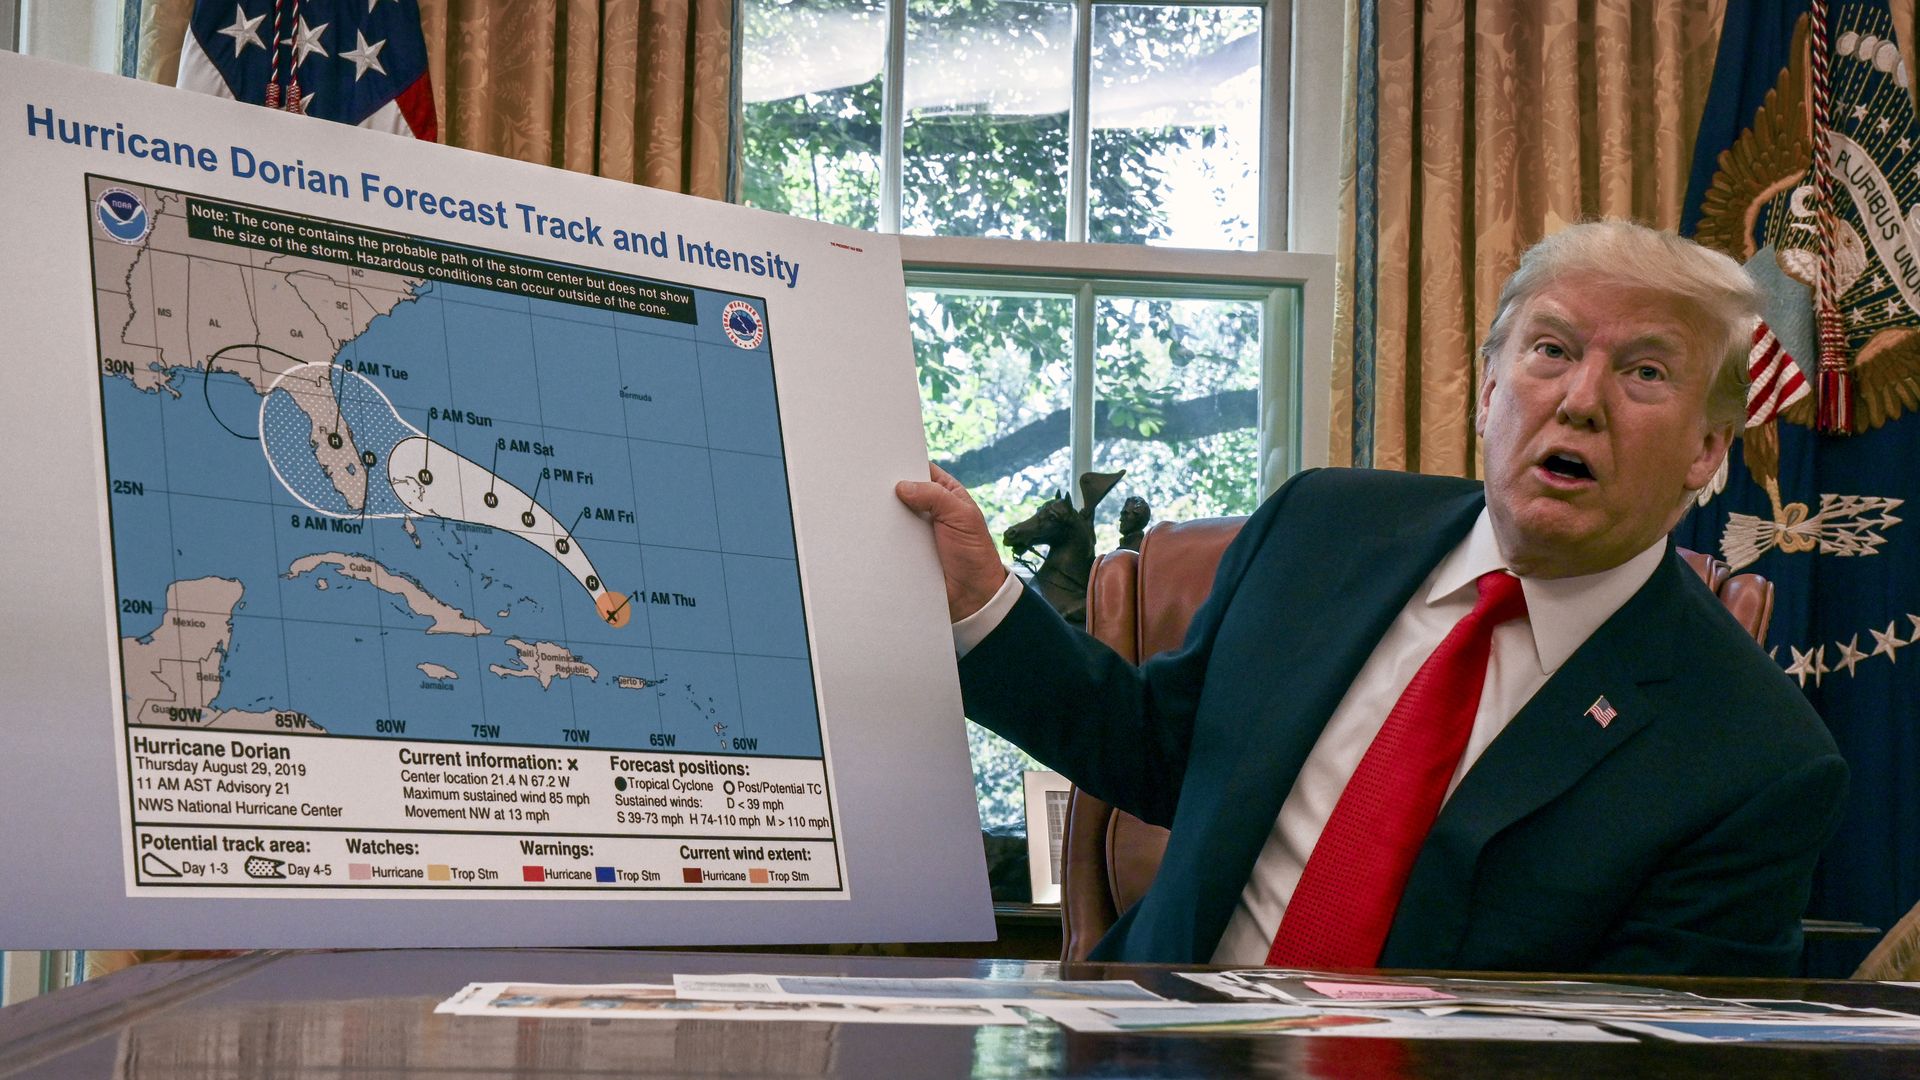 In this image, Trump sits at his desk in the Oval Office and holds up a NOAA map of the path of Hurricane Dorian.